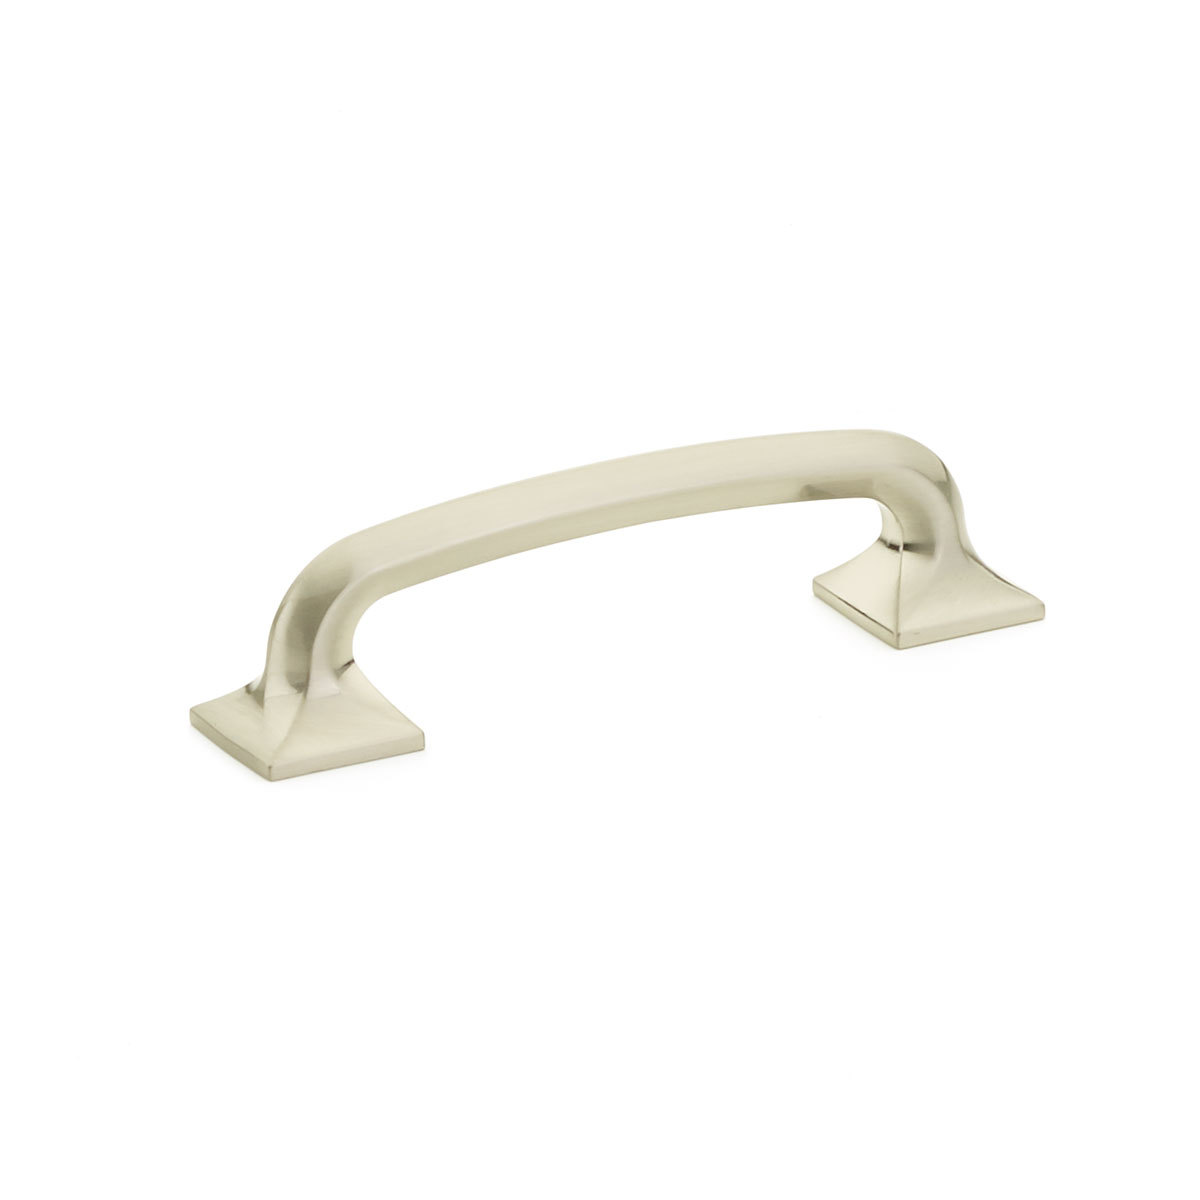 Schaub 206-BN Pull, Square Bases, Brushed Nickel, 4" CC - Brushed Nickel